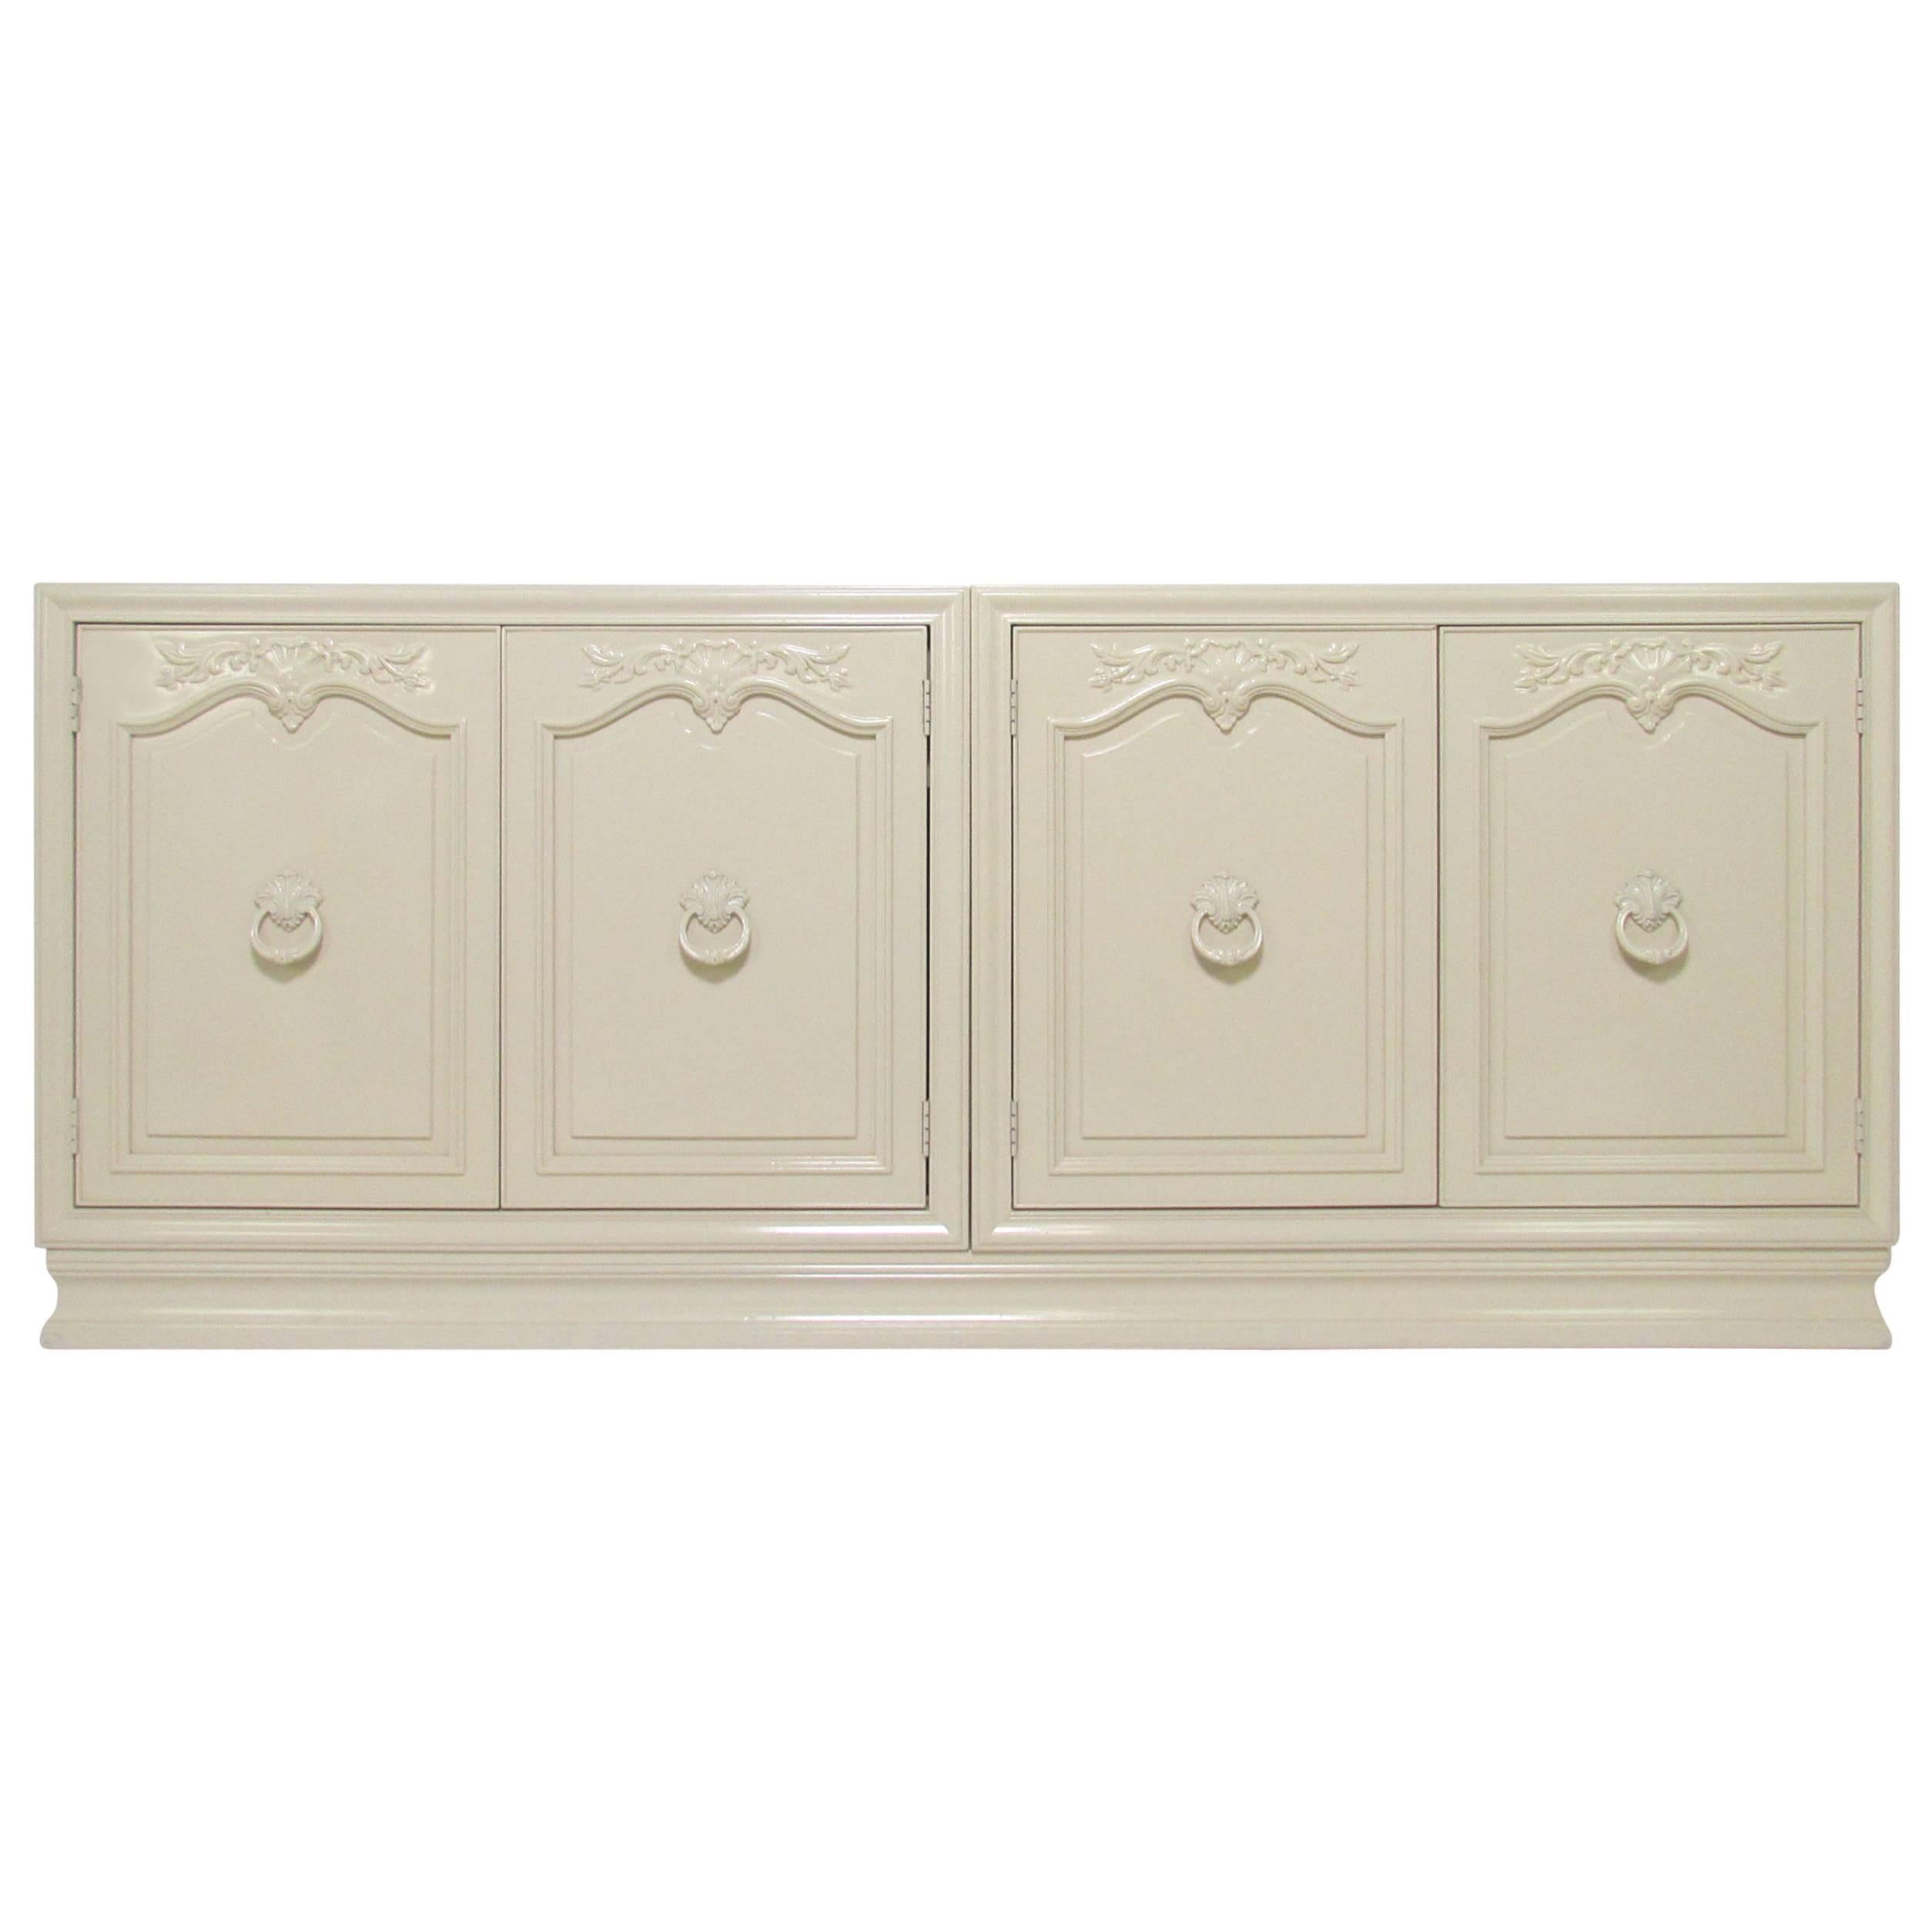 Classical Revival Mid-Century White Lacquered Sideboard Credenza by Henredon